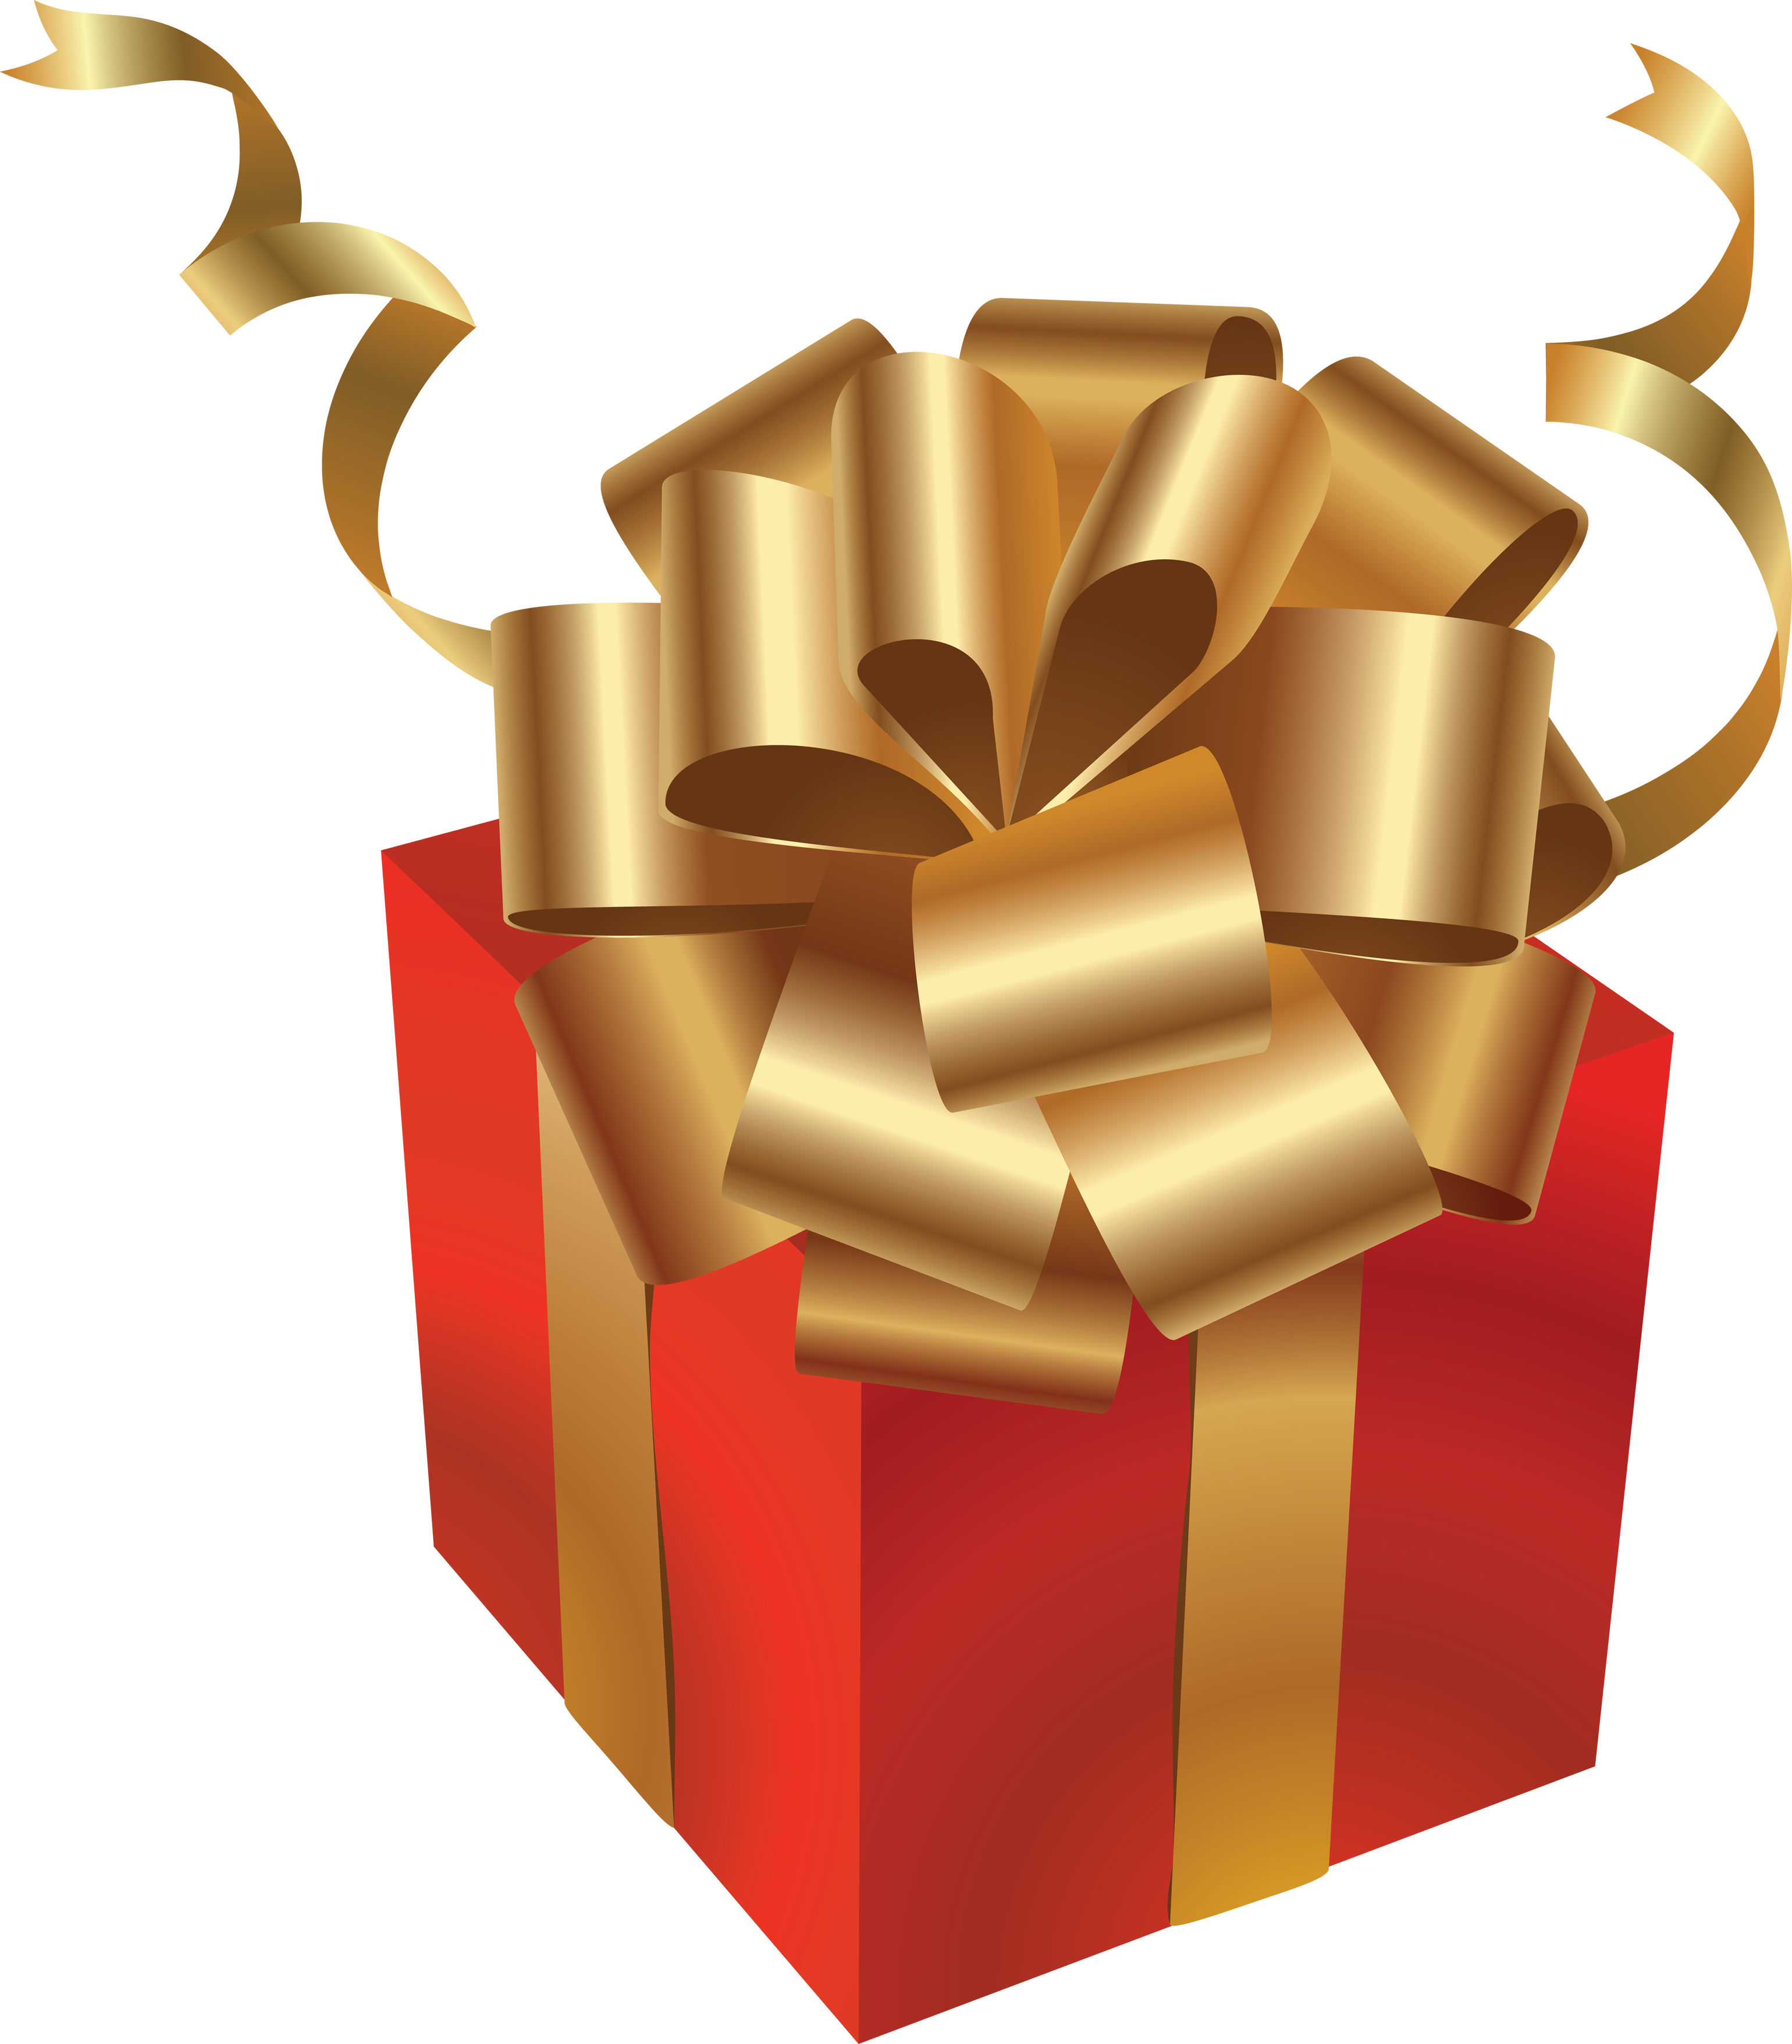 Gift box forty one. Excited clipart surprise present